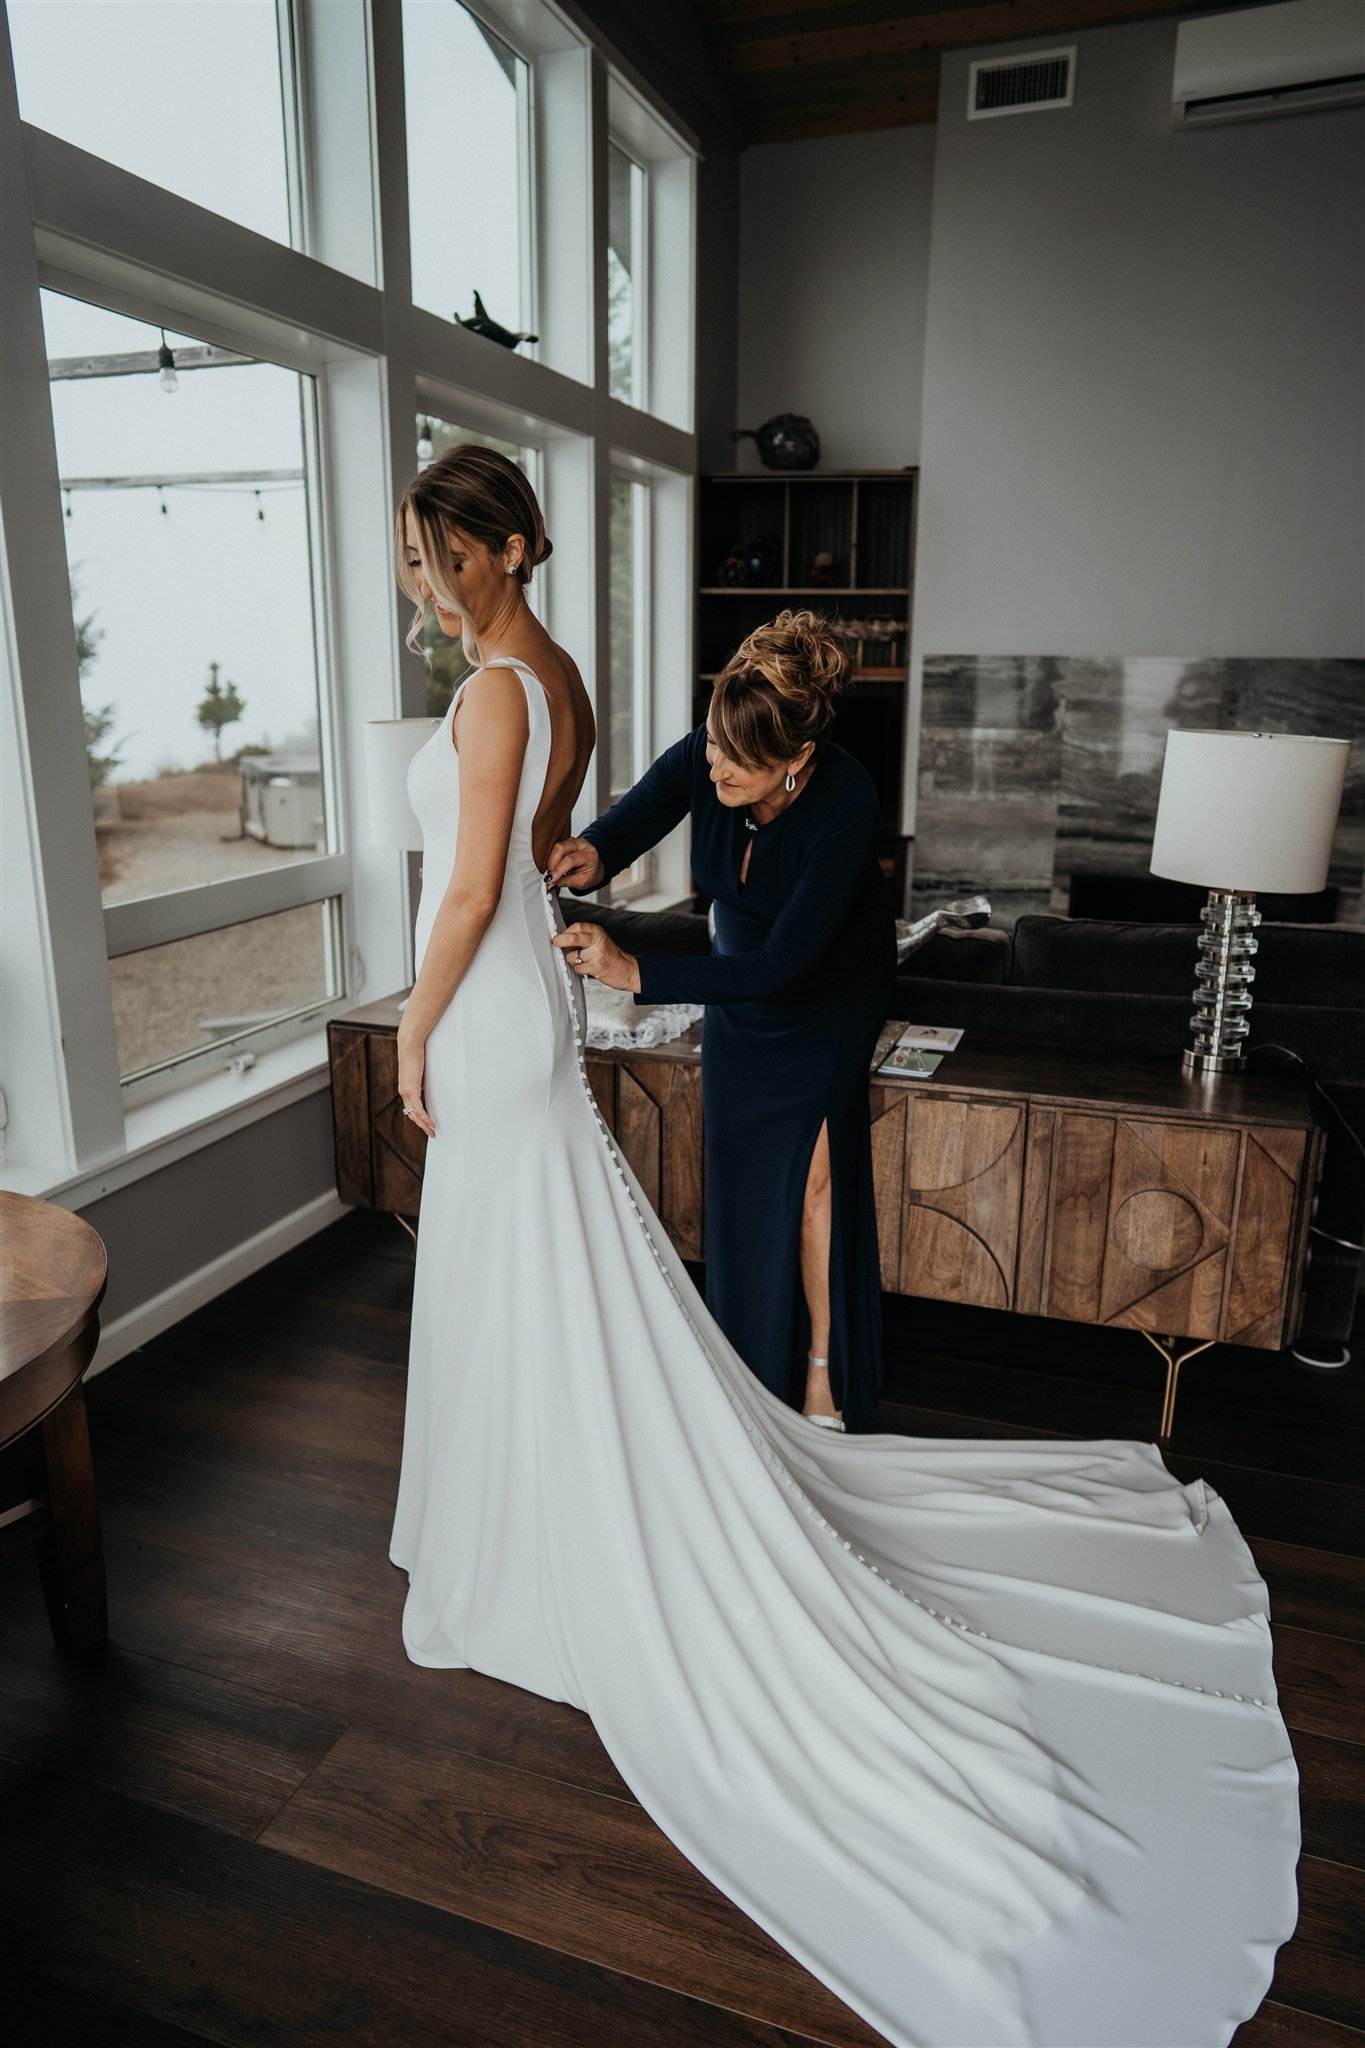 Mother of the Bride zipping white wedding dress while bride is getting ready